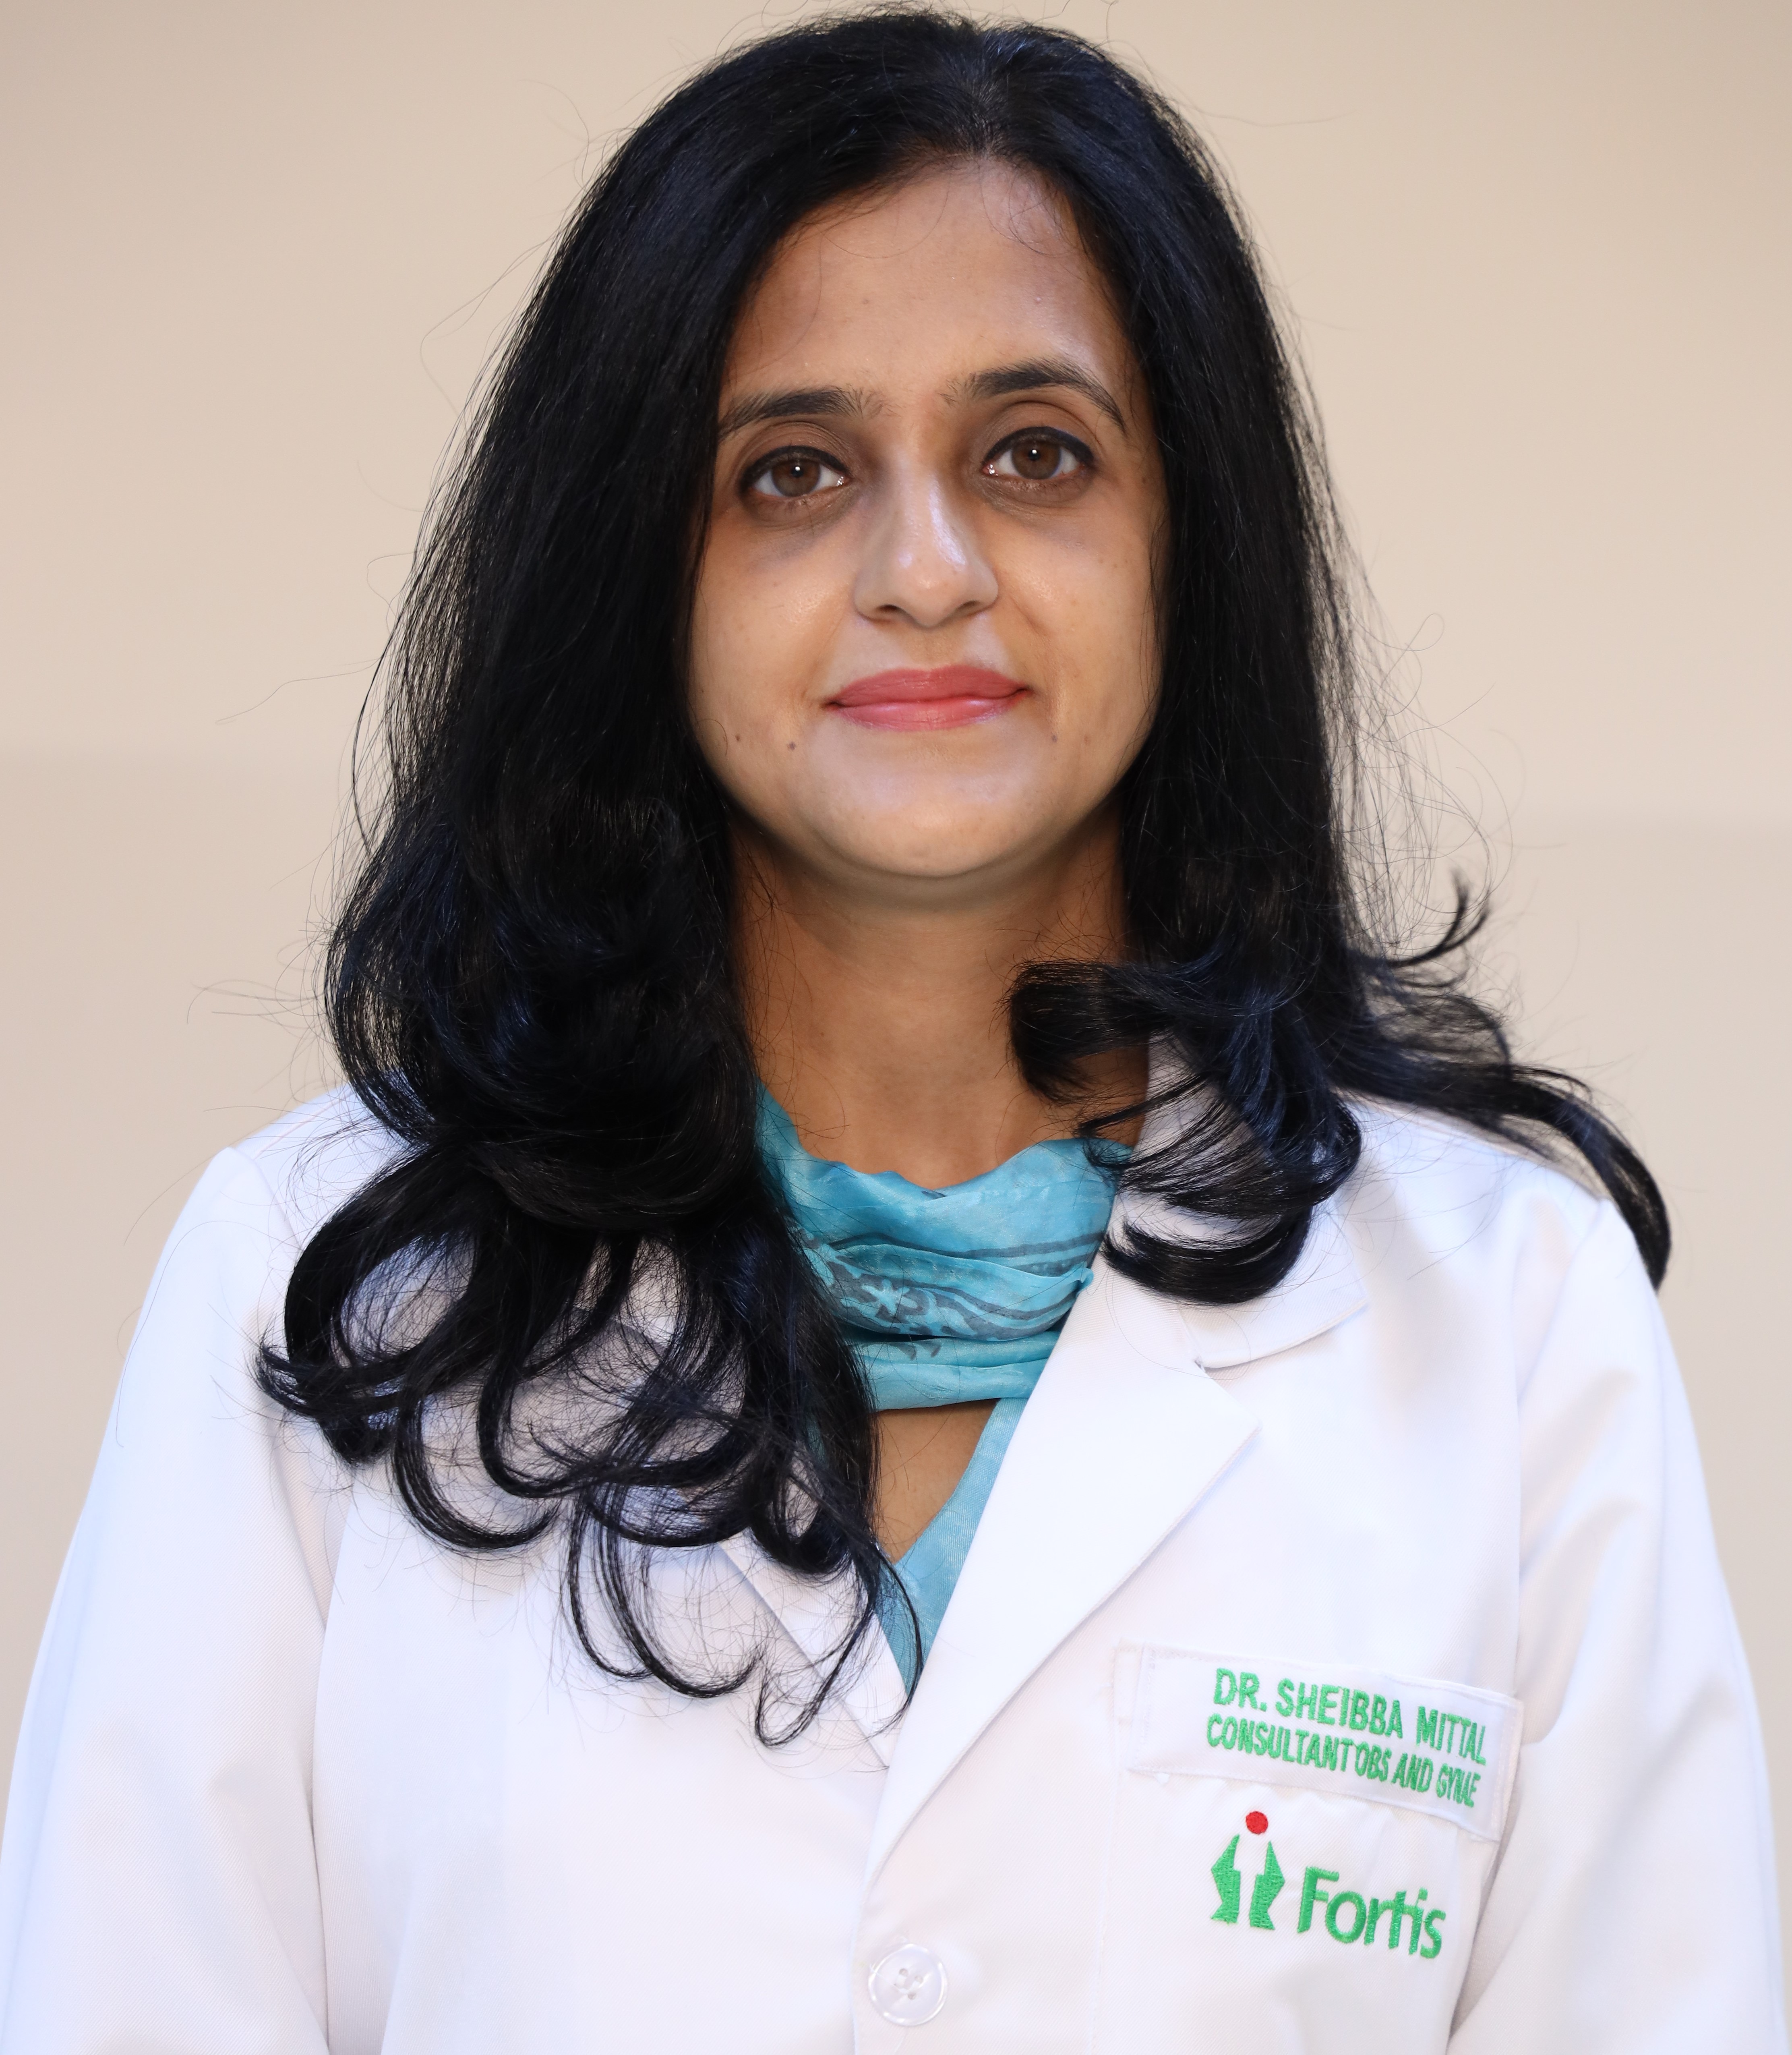 Dr. Sheibba Mittal Obstetrics and Gynaecology Fortis Hospital, Mohali